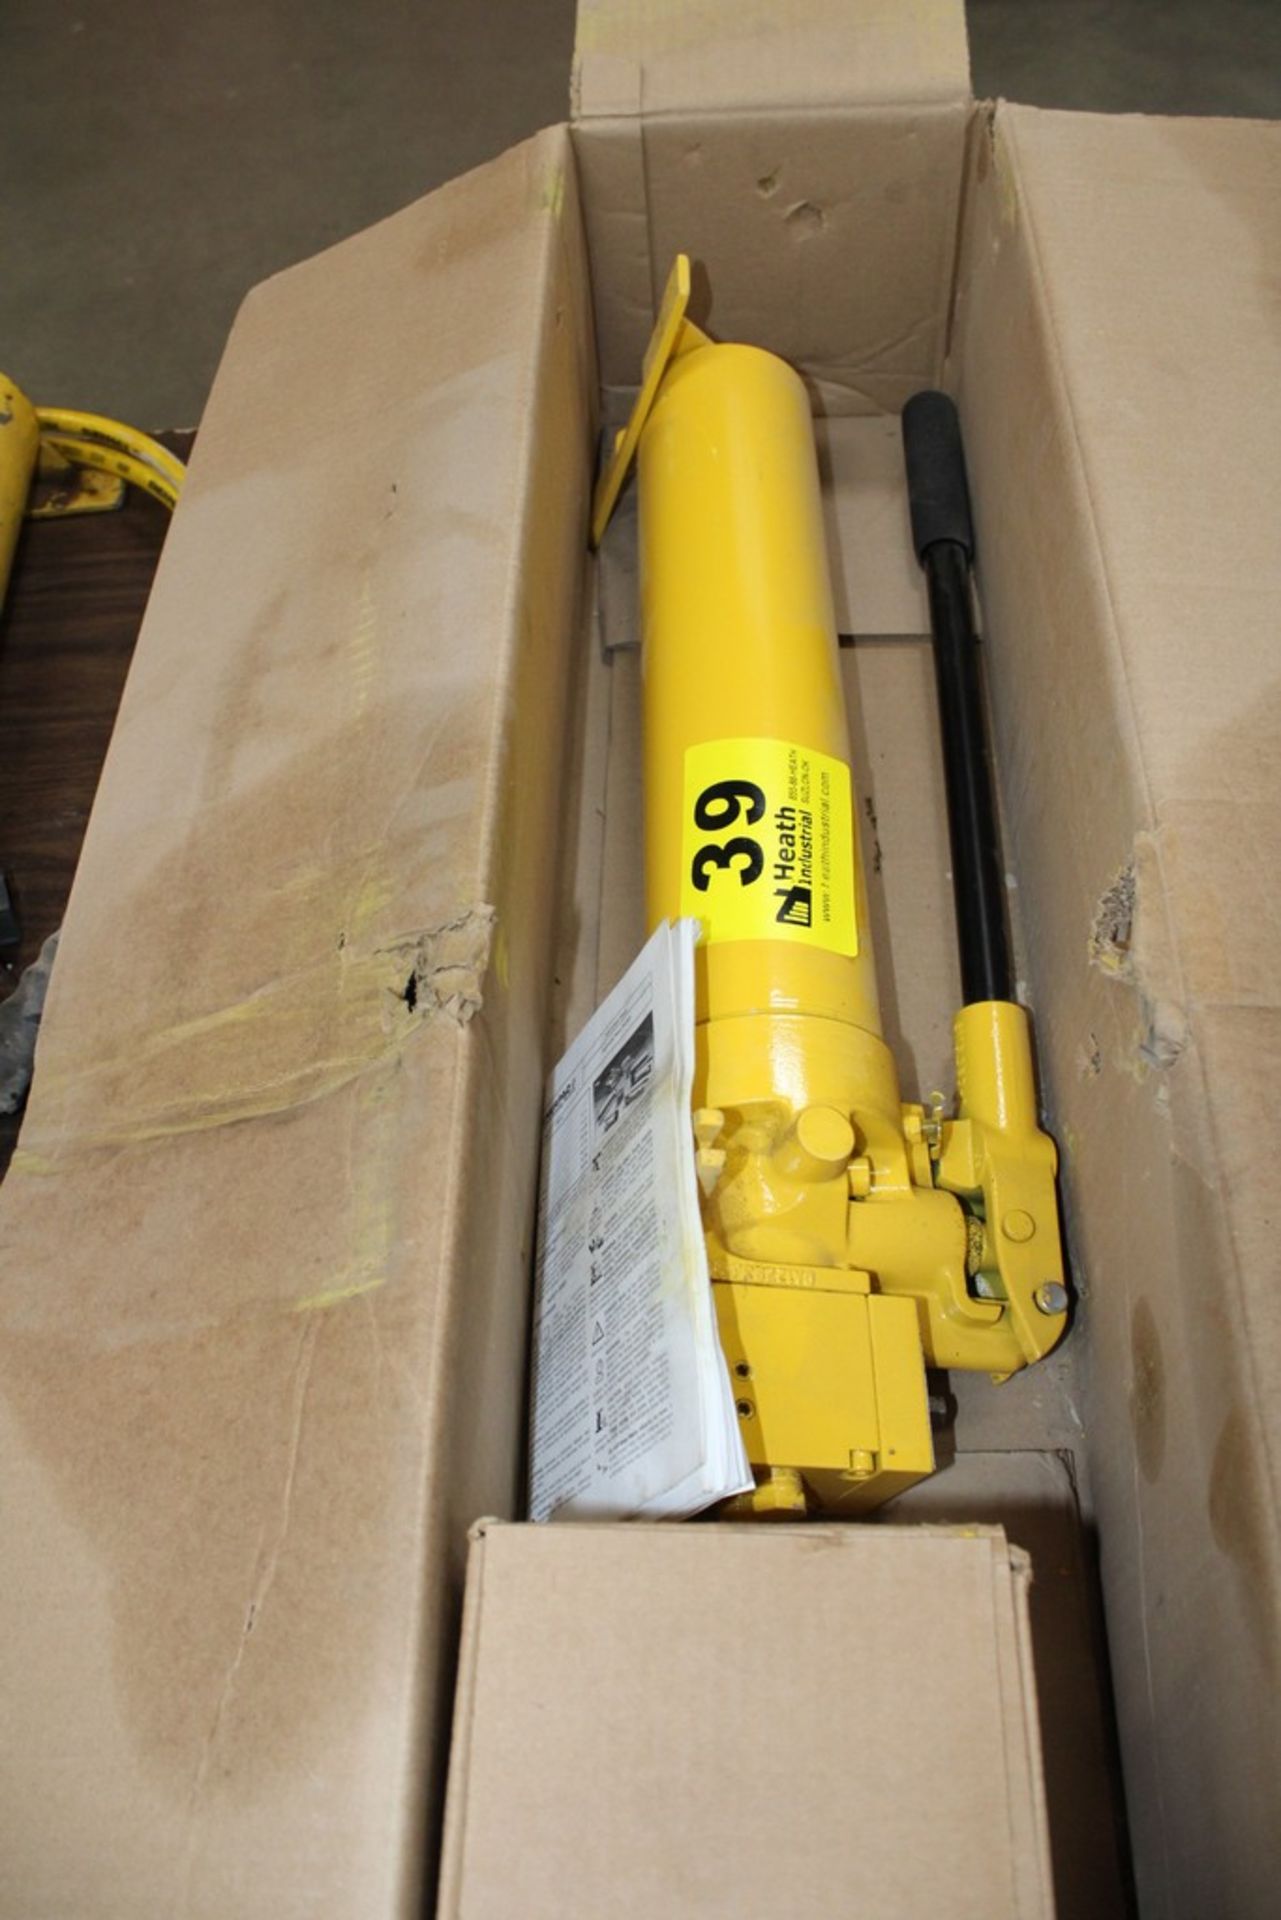 ENERPAC MODEL P-84 HAND PUMP (APPEARS TO BE NEW)